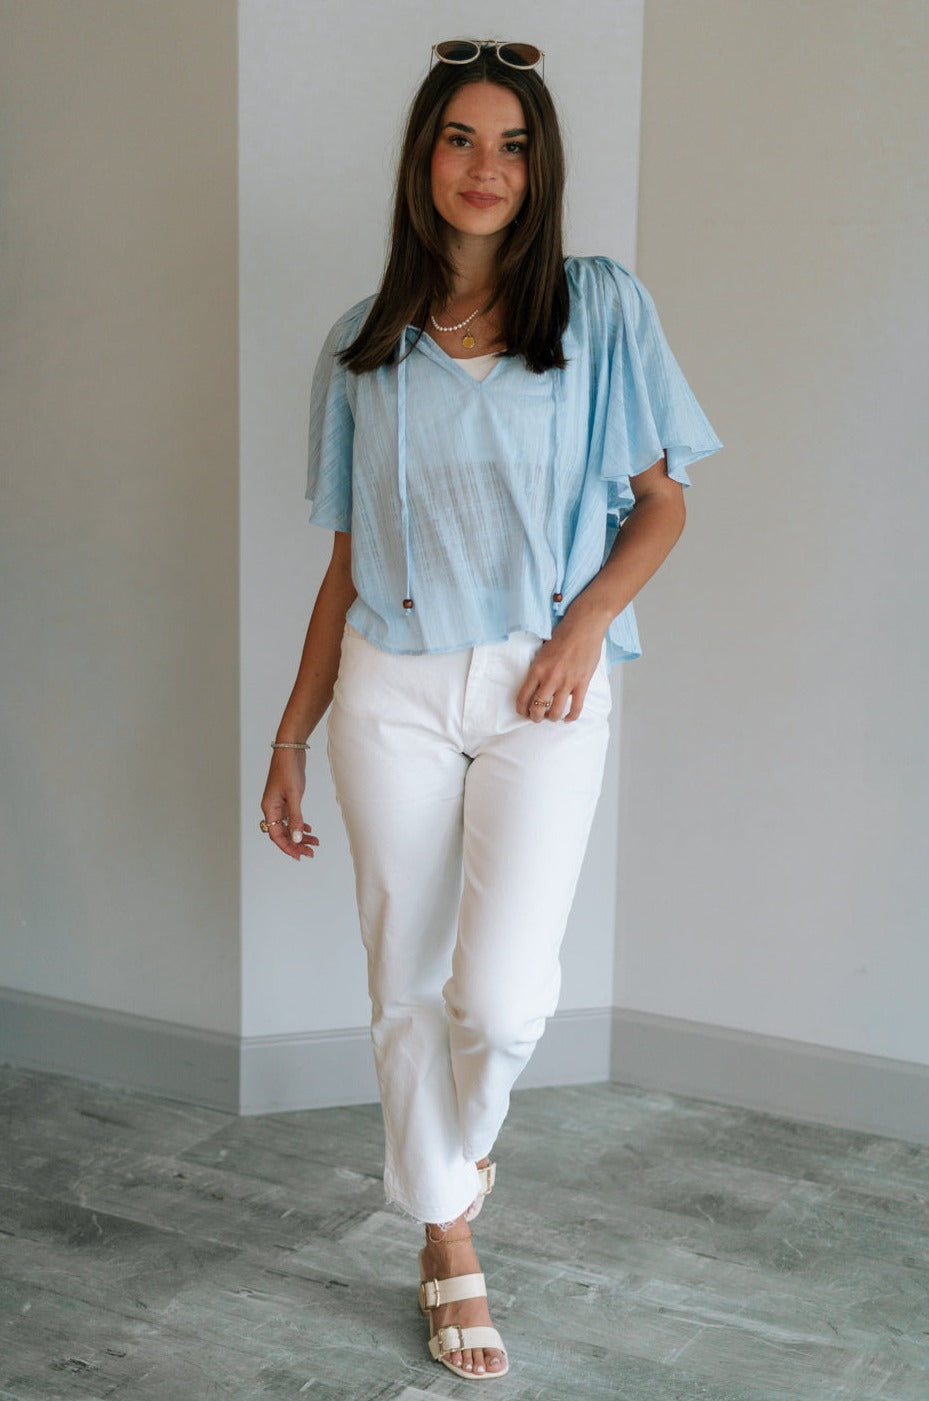 Full body view of female model wearing the Danna Light Blue Short Sleeve Top which features Light Blue Cotton Fabric, Round Neckline with Tie Closure, Wooden Beads Detail and Short Sleeves